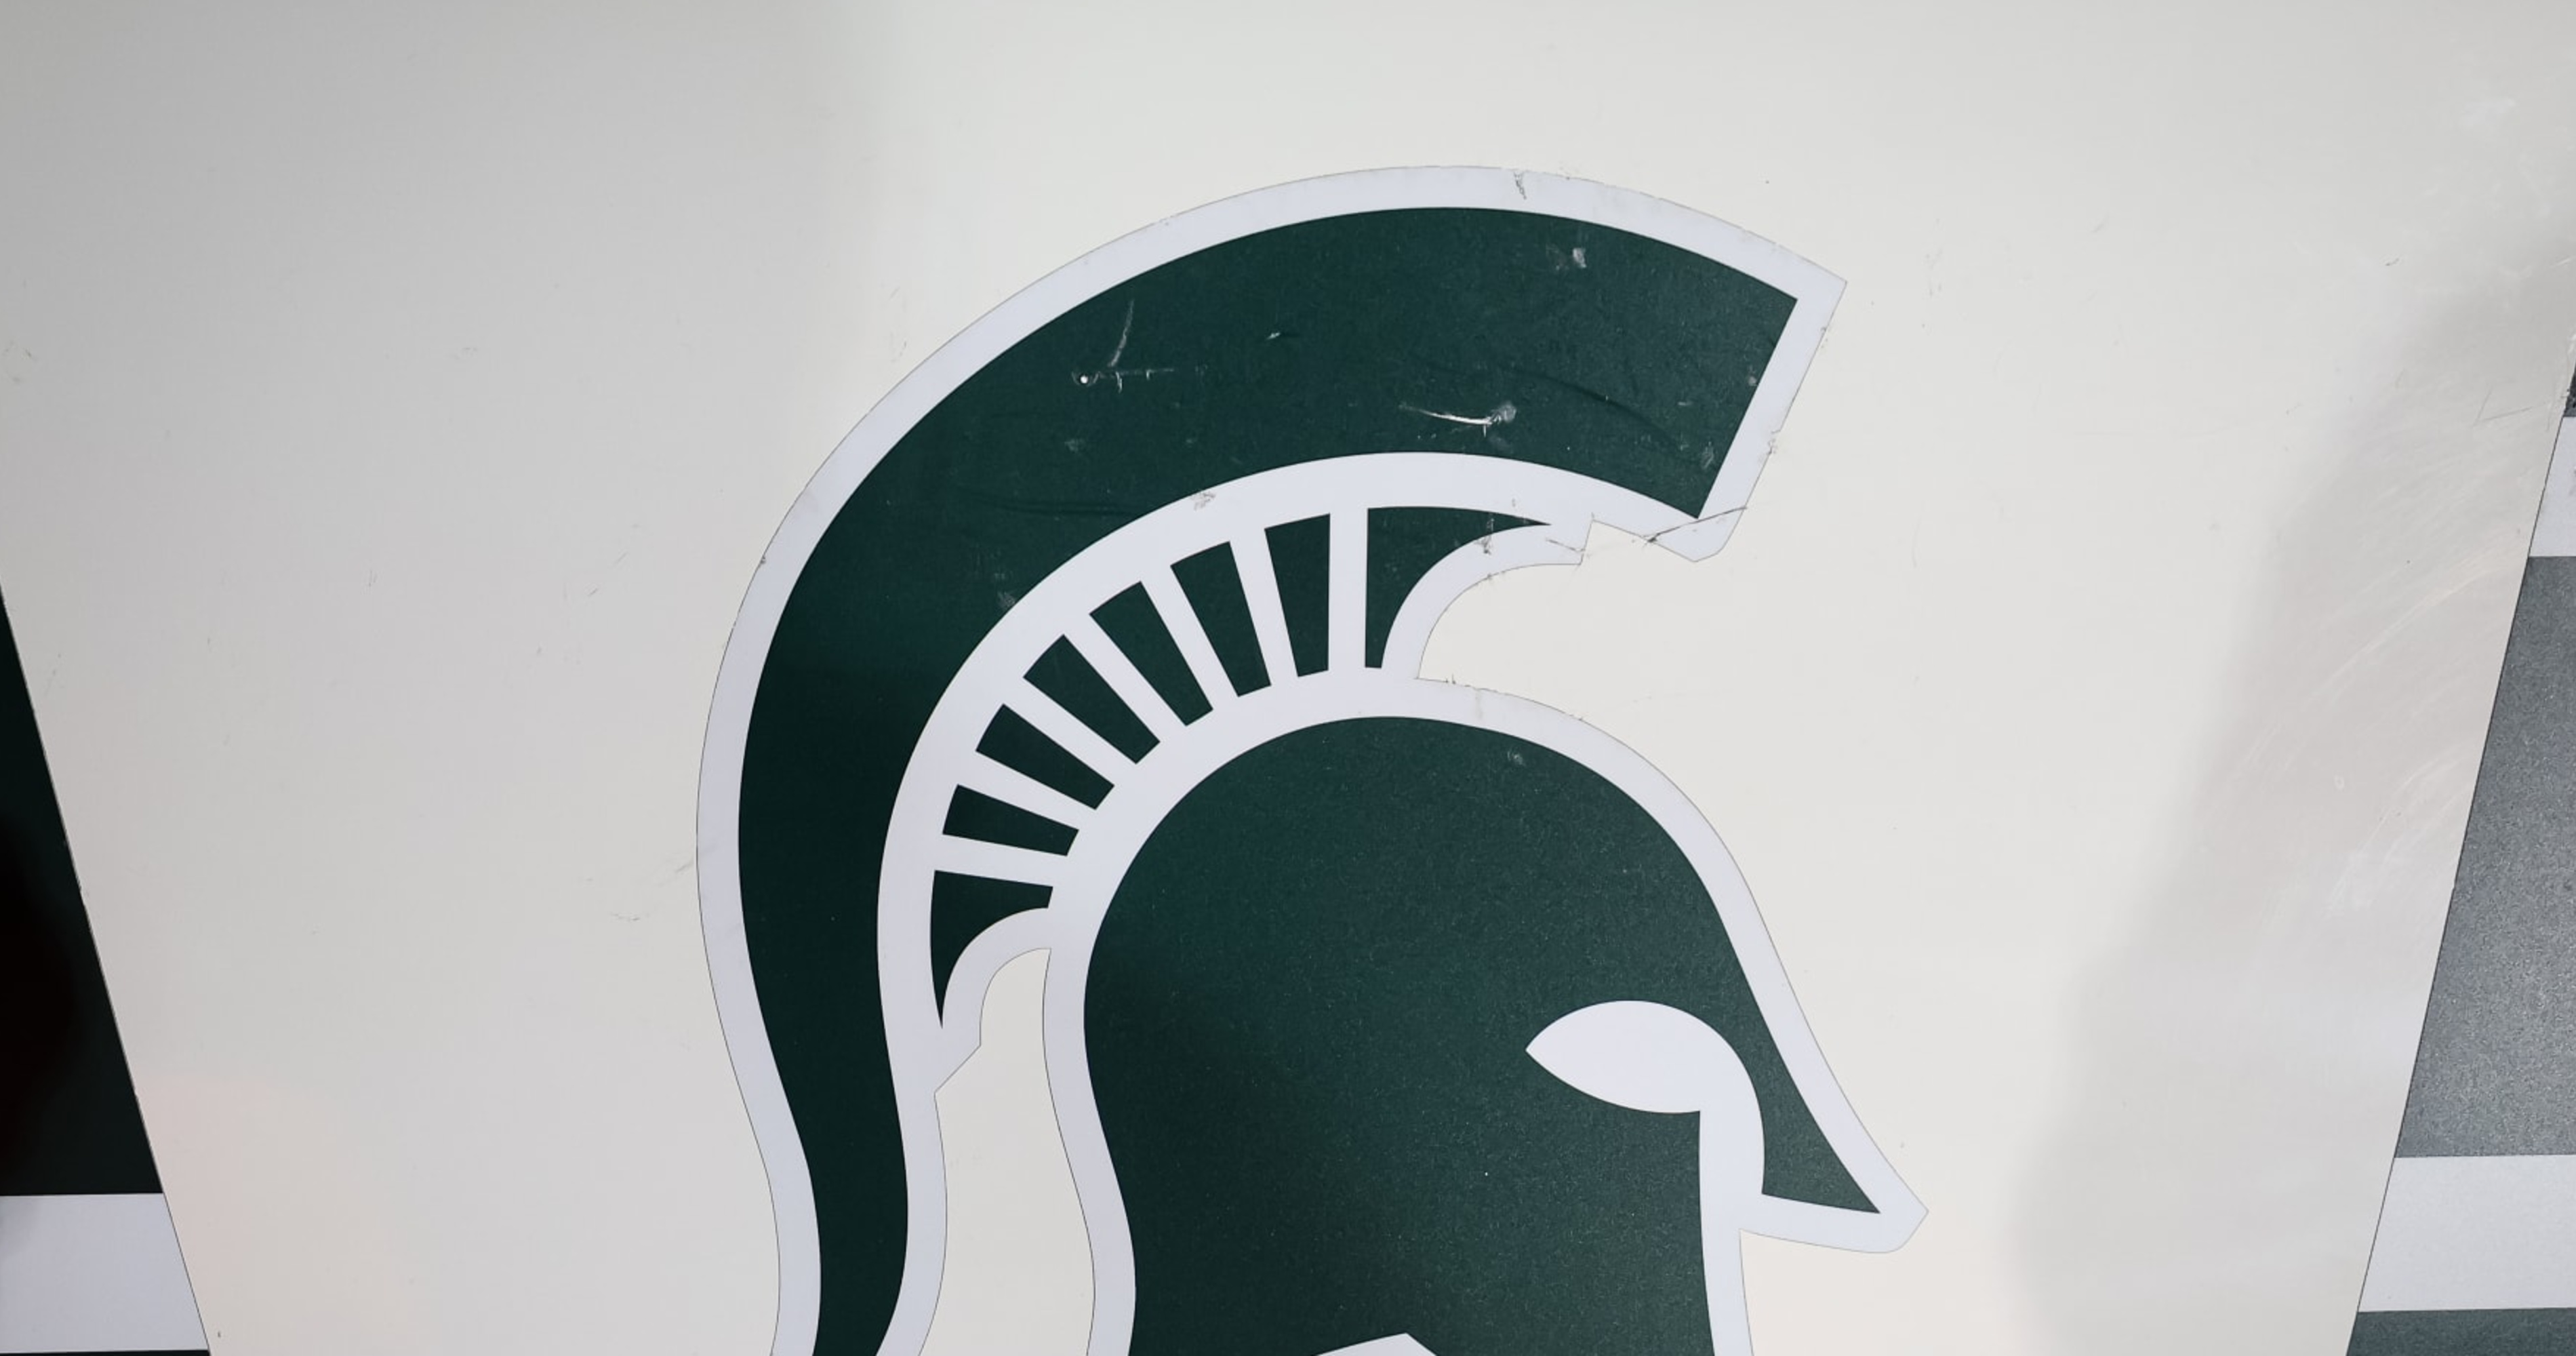 Michigan State Teams to Resume Play Following Campus Shooting